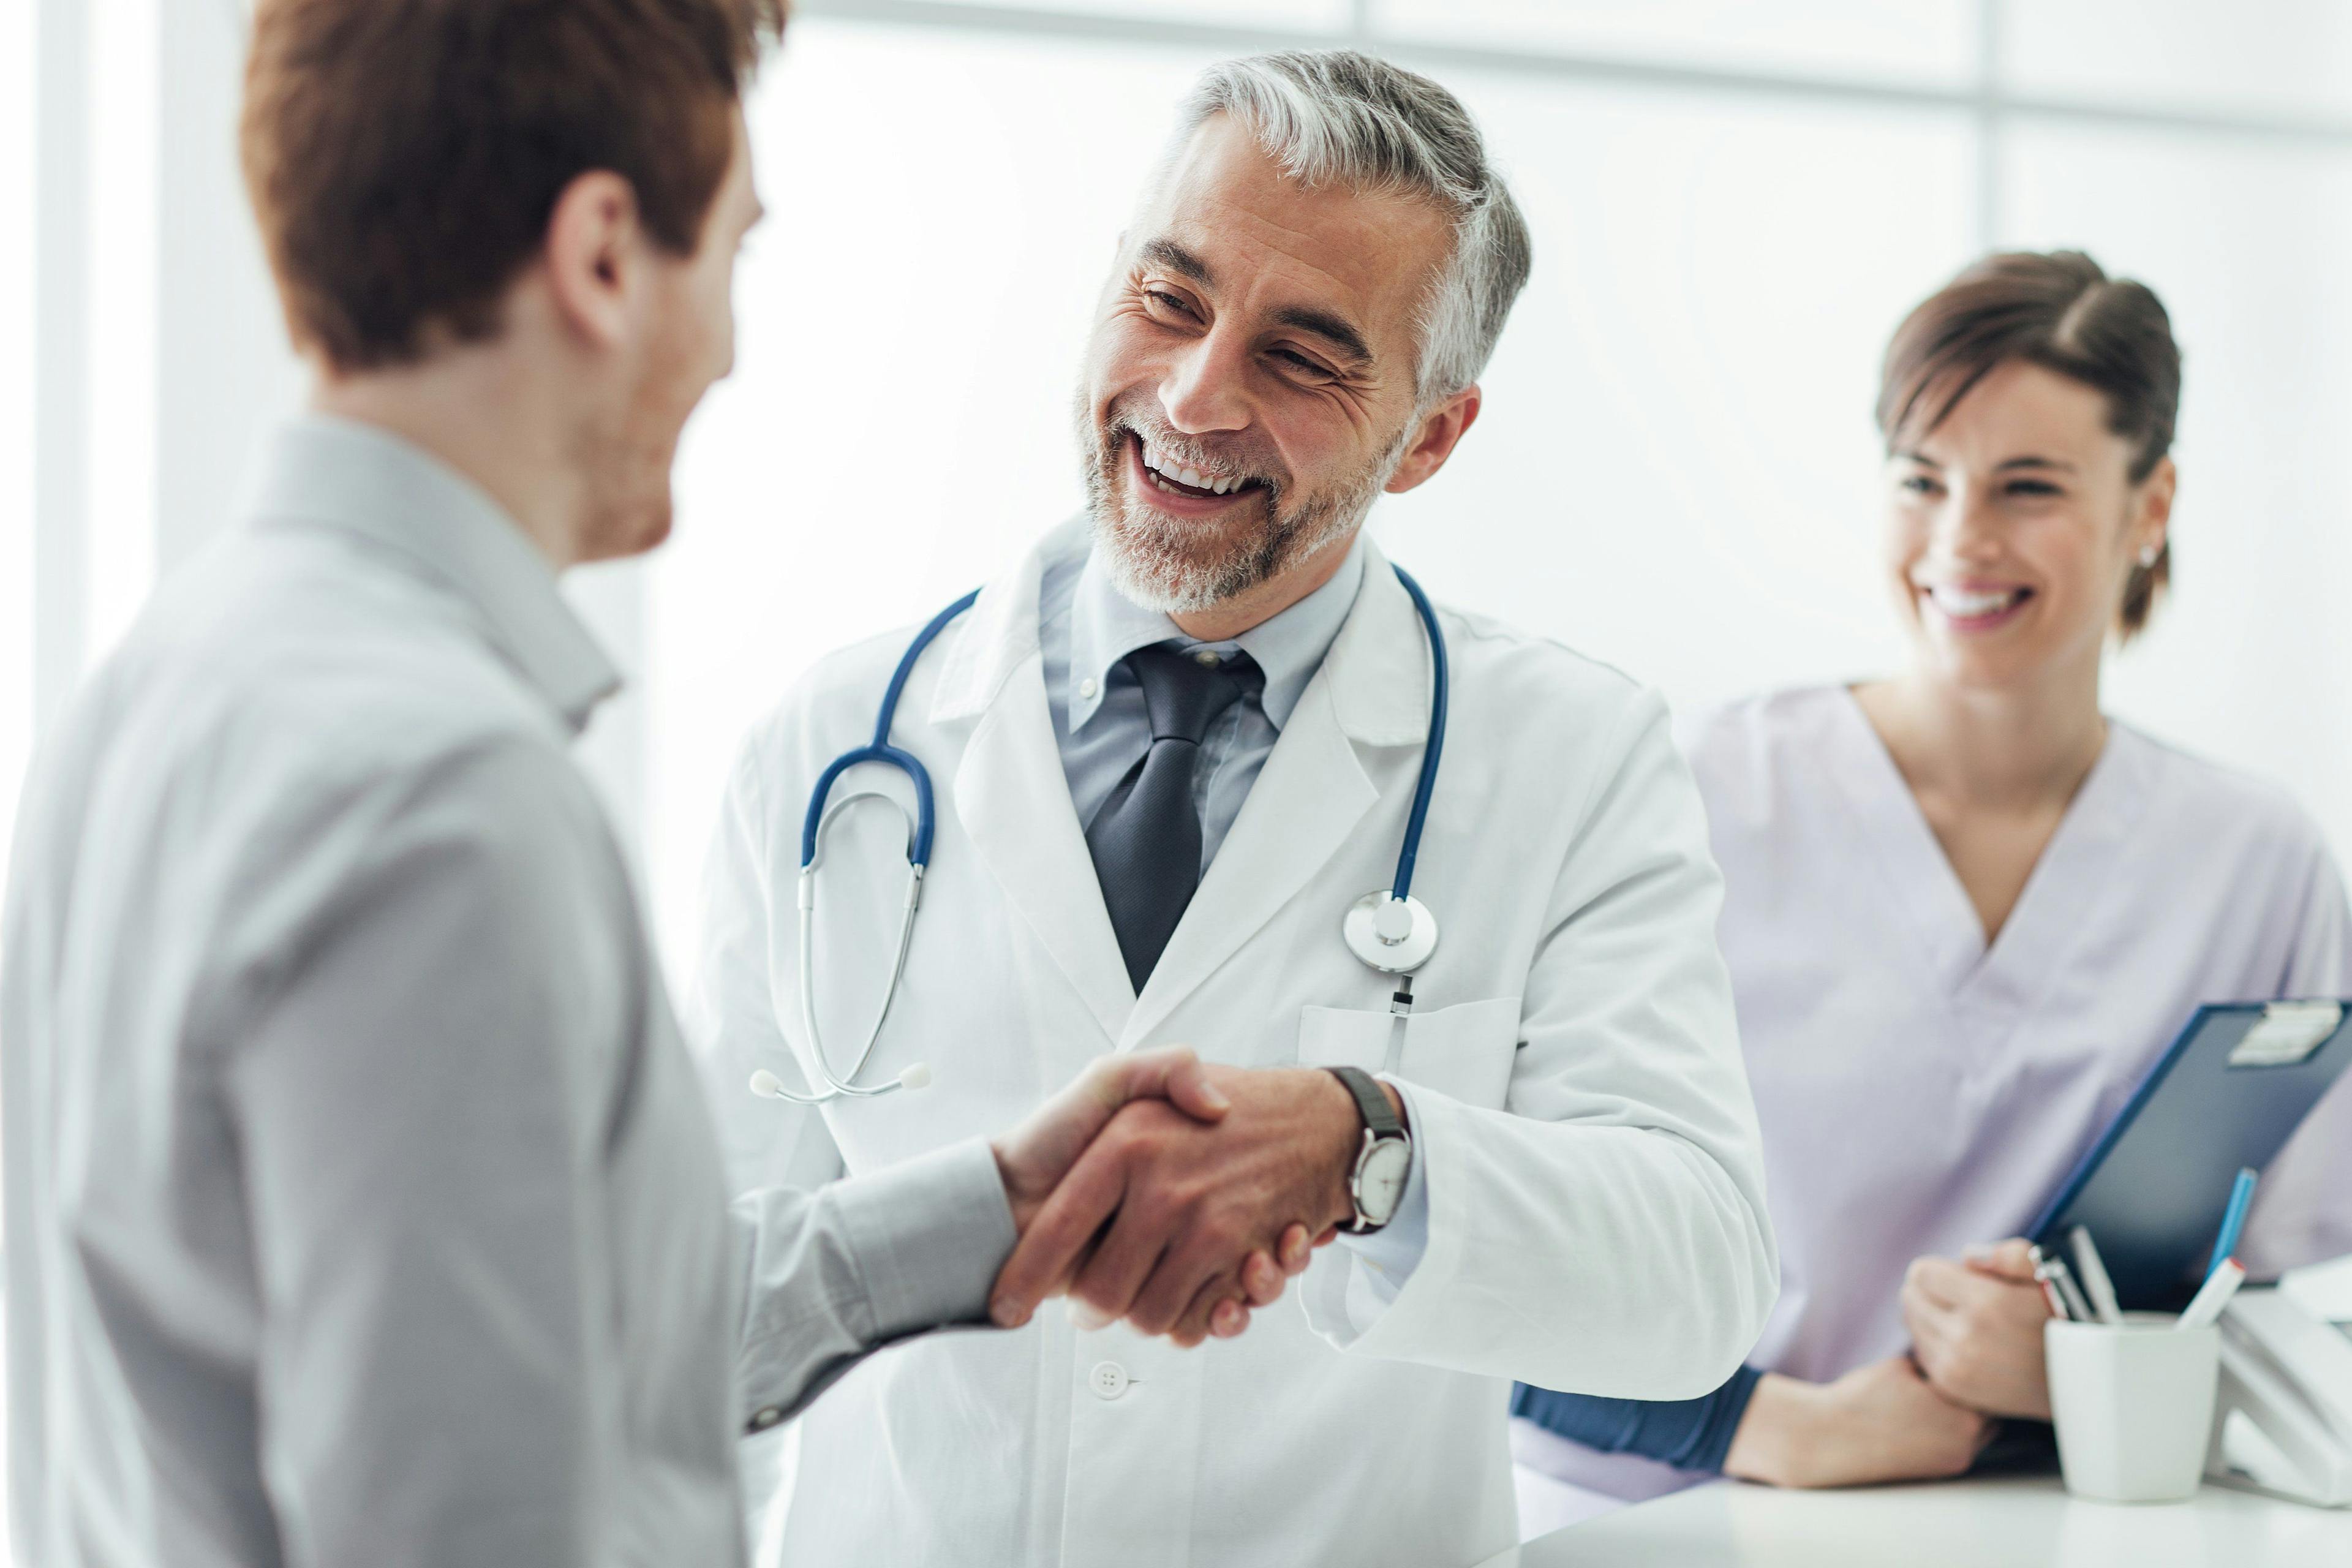 doctor shaking hands with patient ©stokkete-stock.adobe.com